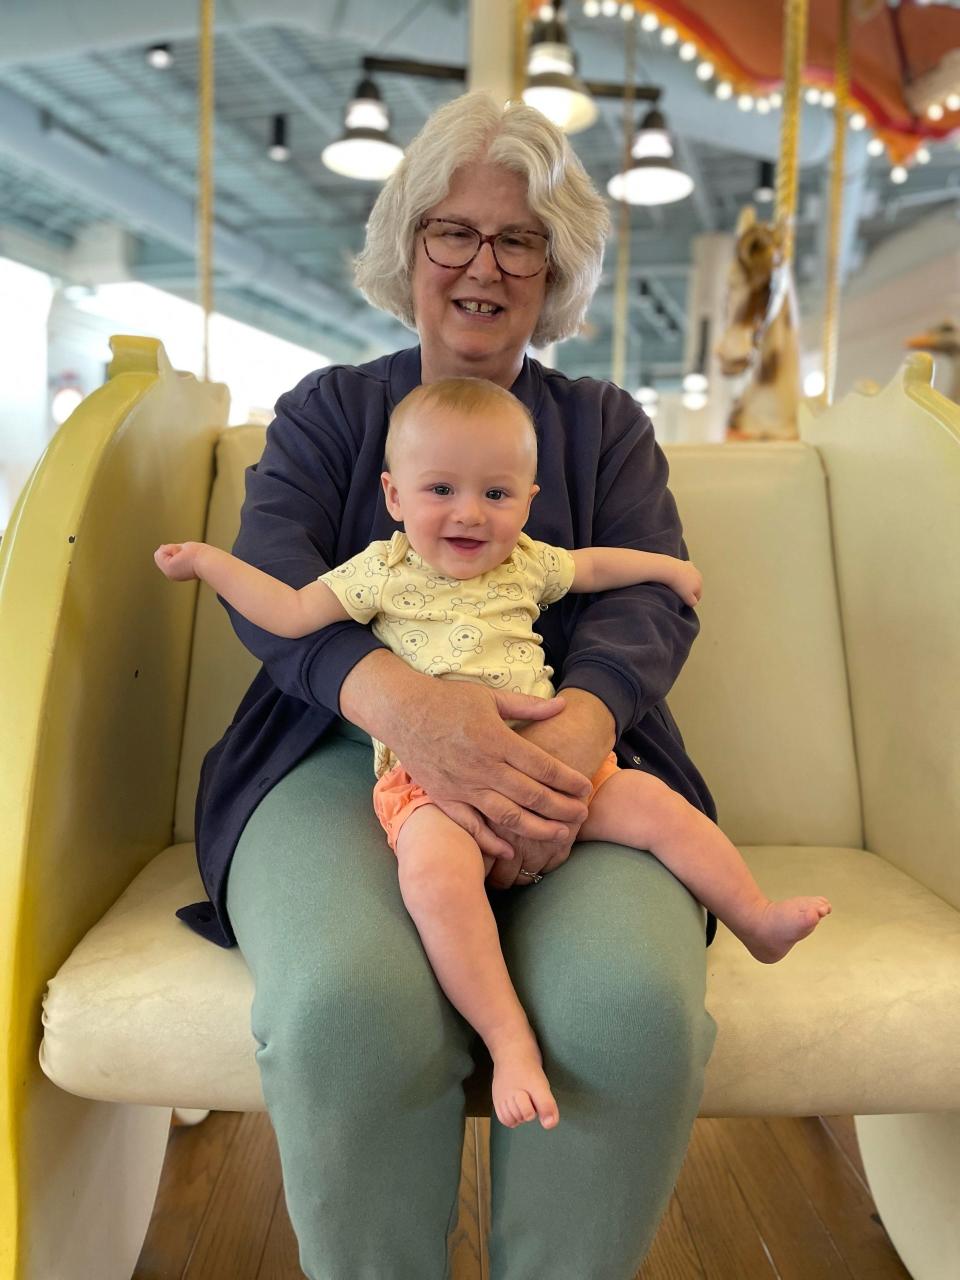 Emmy Yoder, 62, holds her granddaughter, whom she can now watch full-time thanks to the relief she received through the one-time adjustment. The now-retired teacher in Missouri was denied forgiveness despite being eligible for it through various programs. Hefty interest made it difficult to shrink the debt.